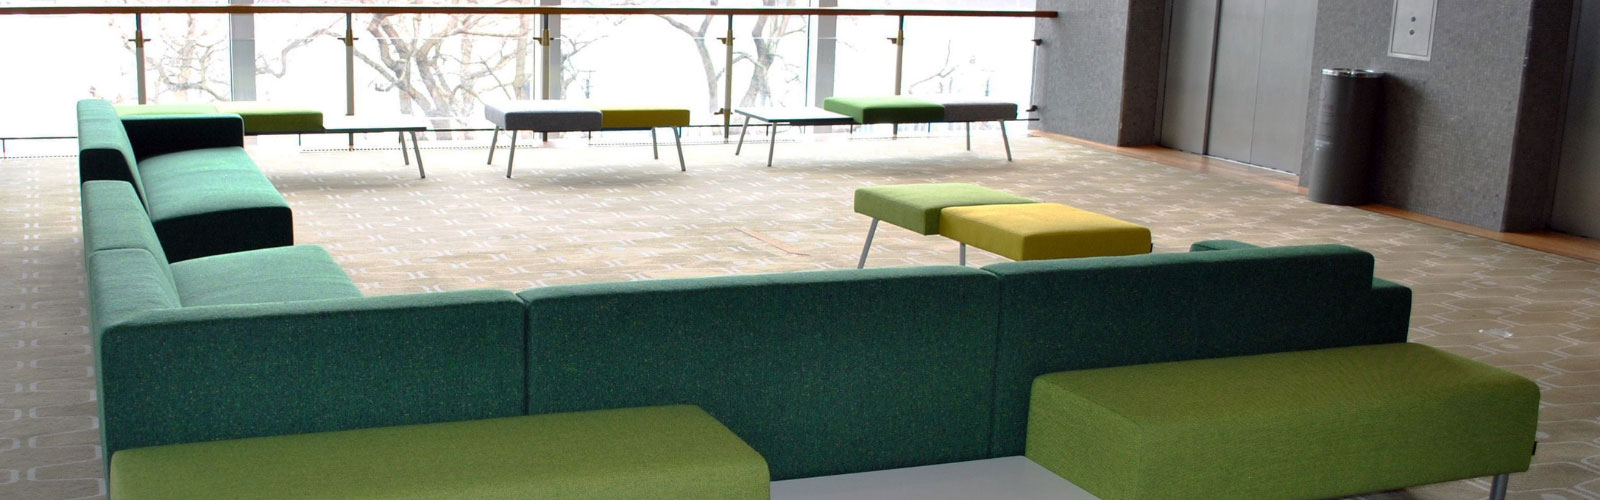 HM101 by Hitch Mylius modular seating